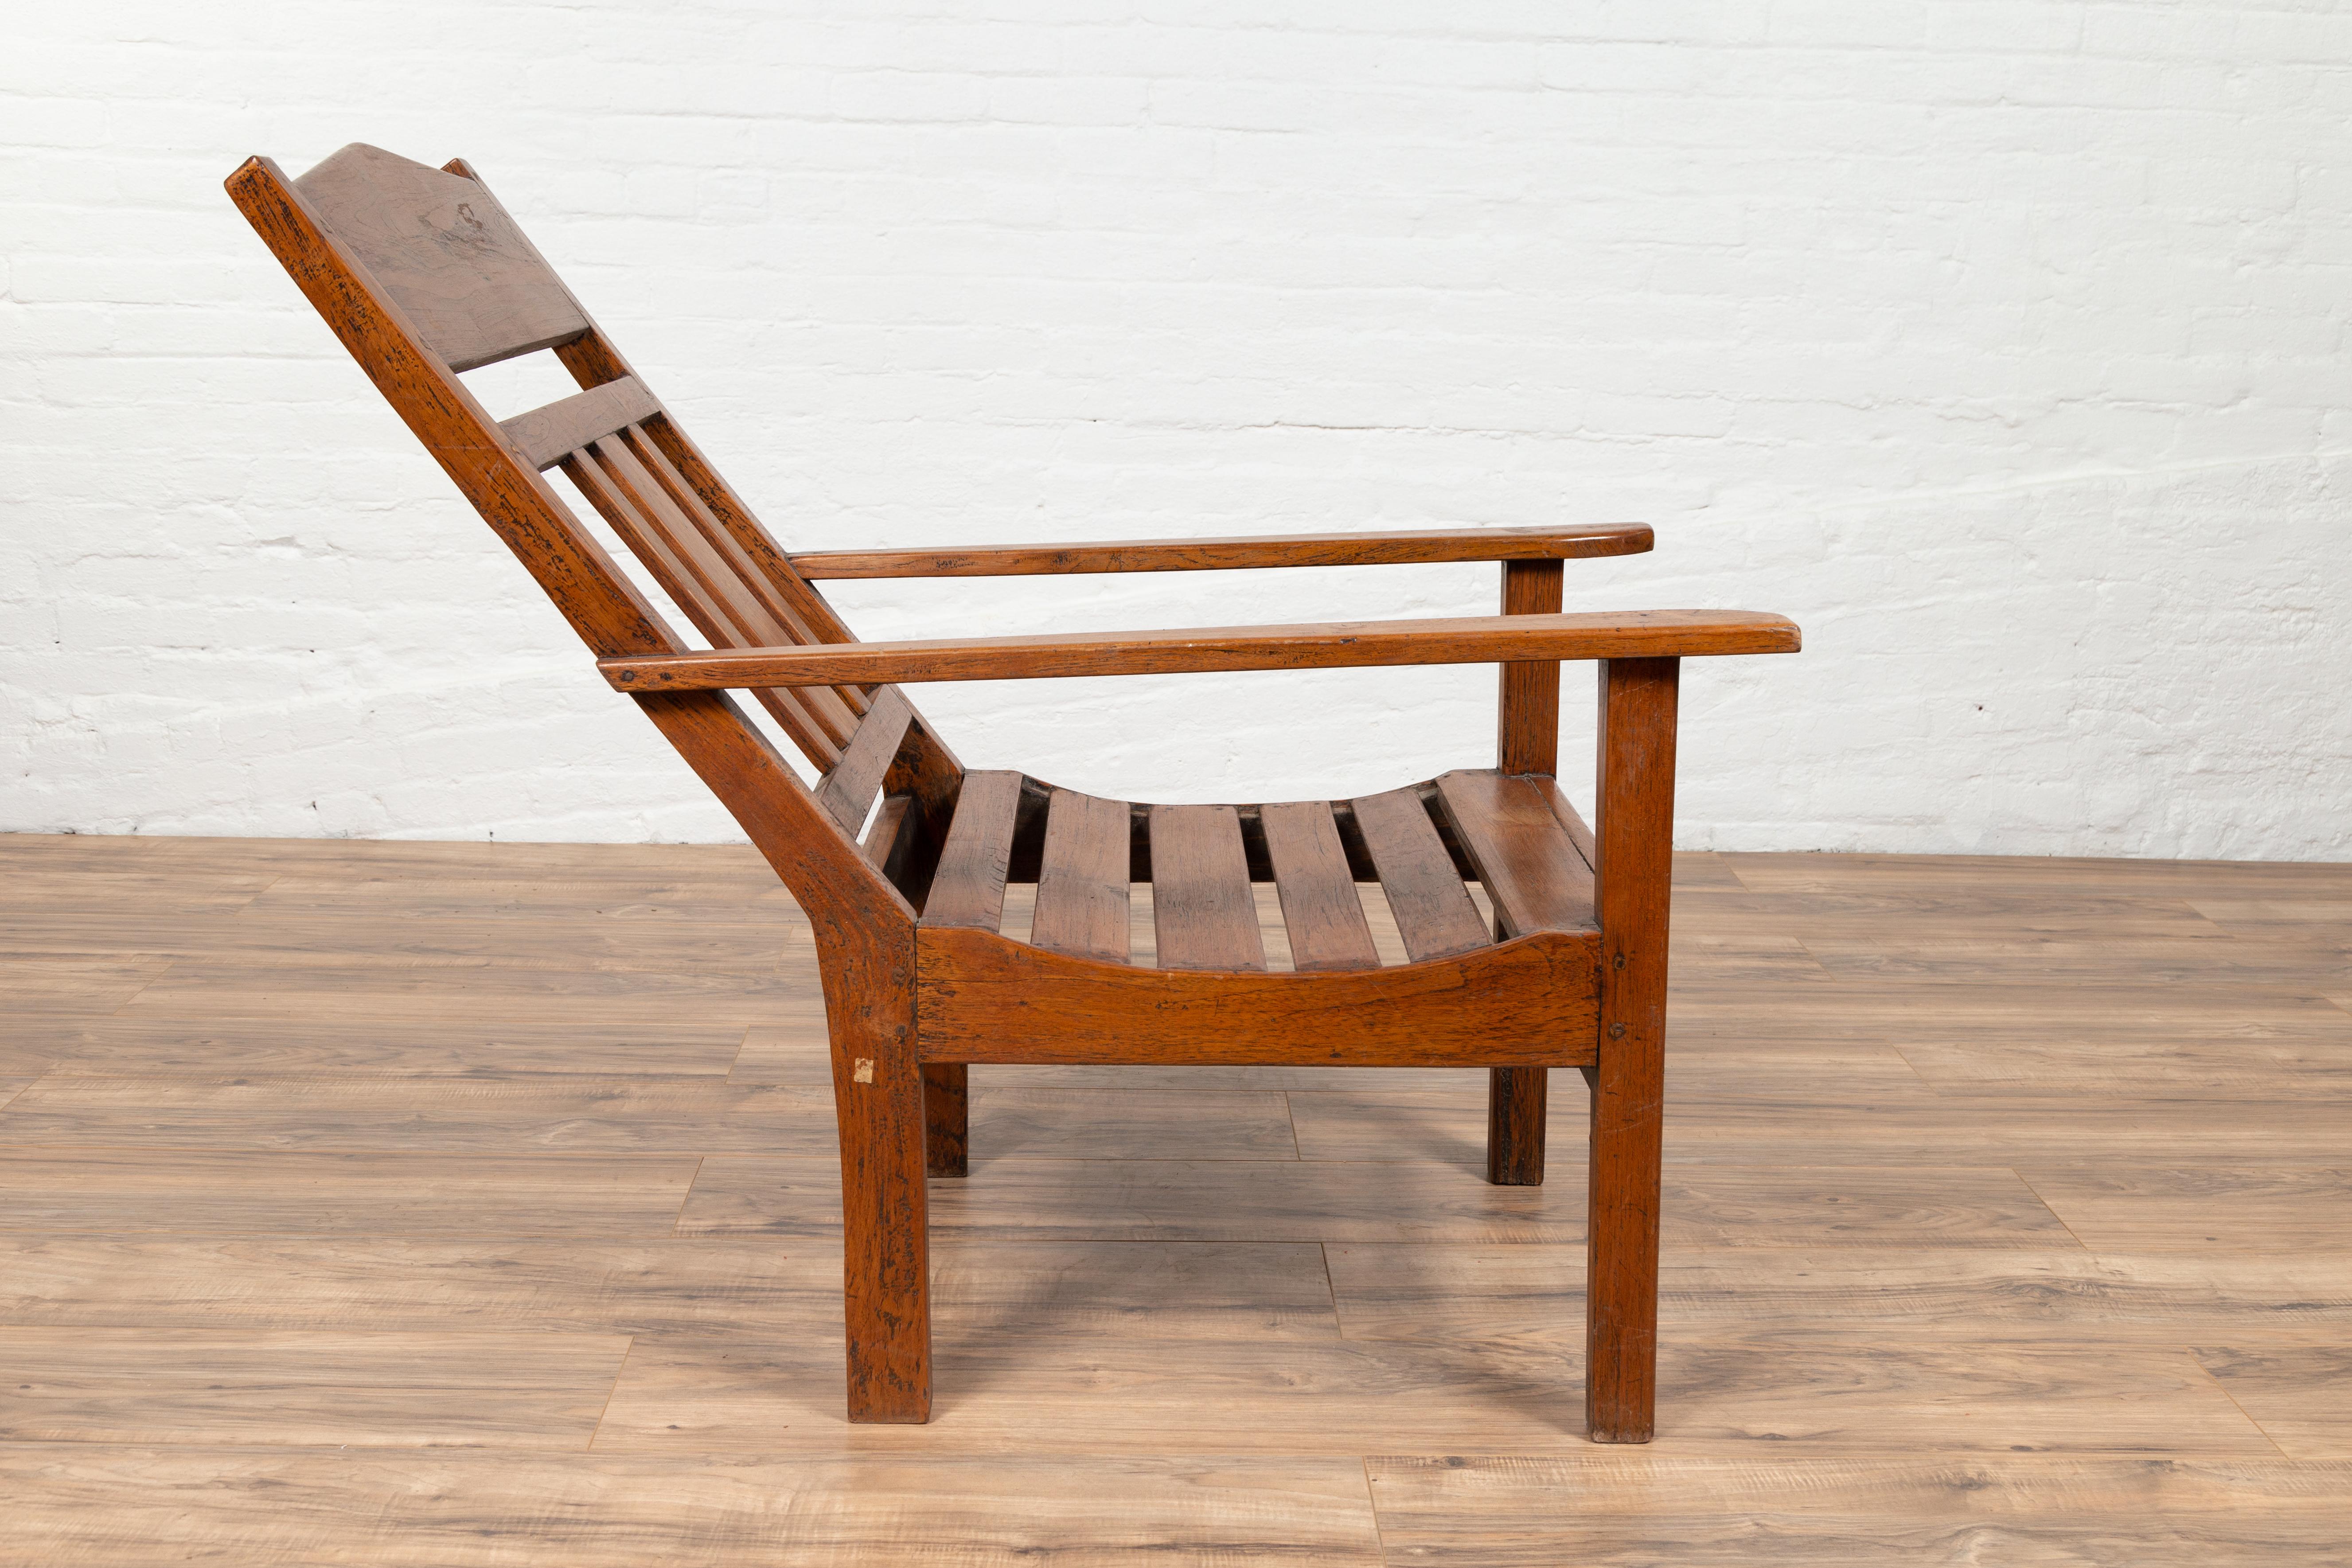 20th Century Javanese Vintage Dutch Colonial Plantation Wooden Lounge Chair with Slanted Back For Sale